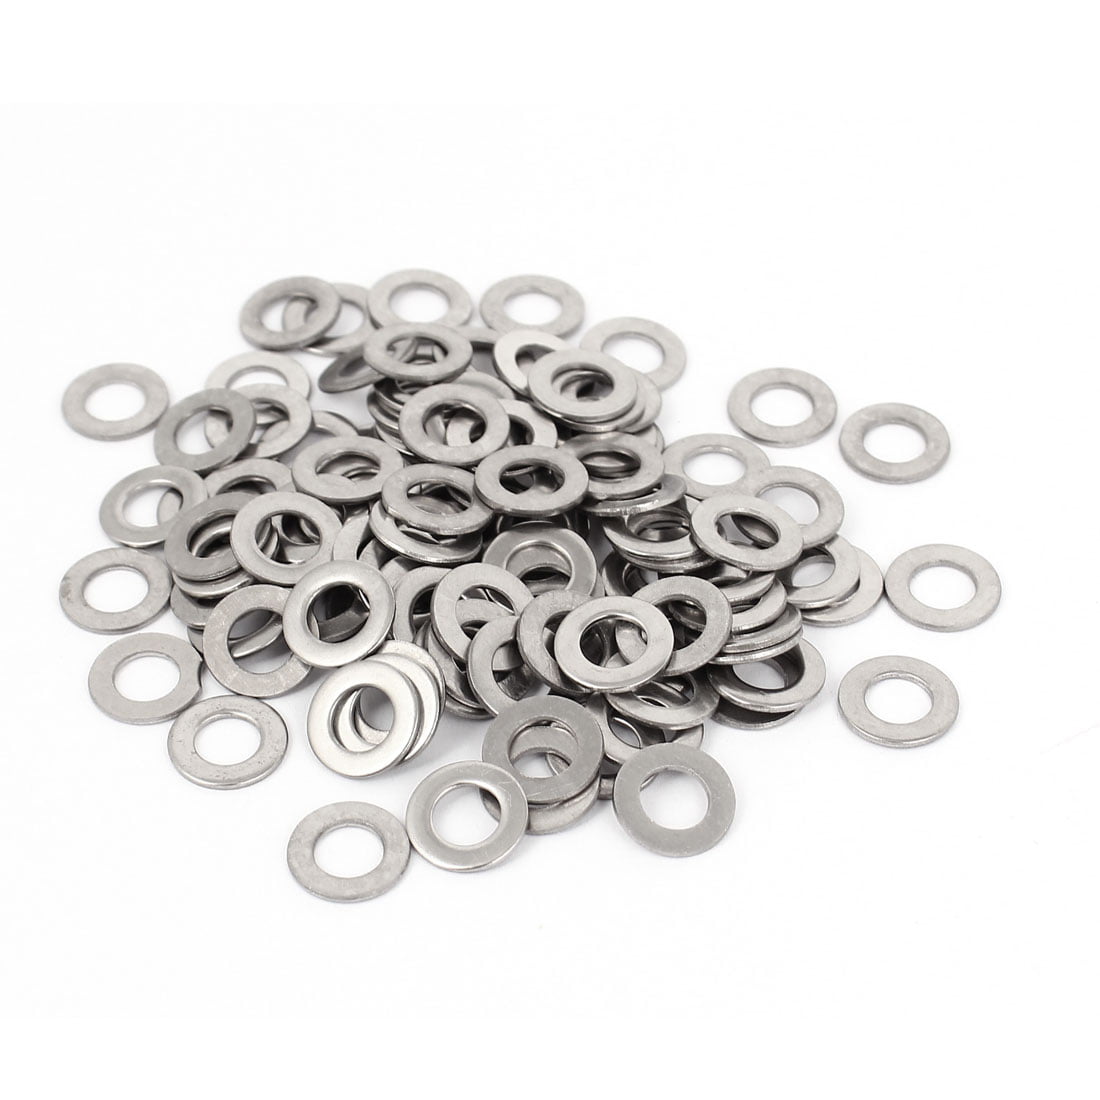 100 M4 OR 4MM Metric Stainless Steel EXTRA THICK HEAVY DUTY Flat Washers 